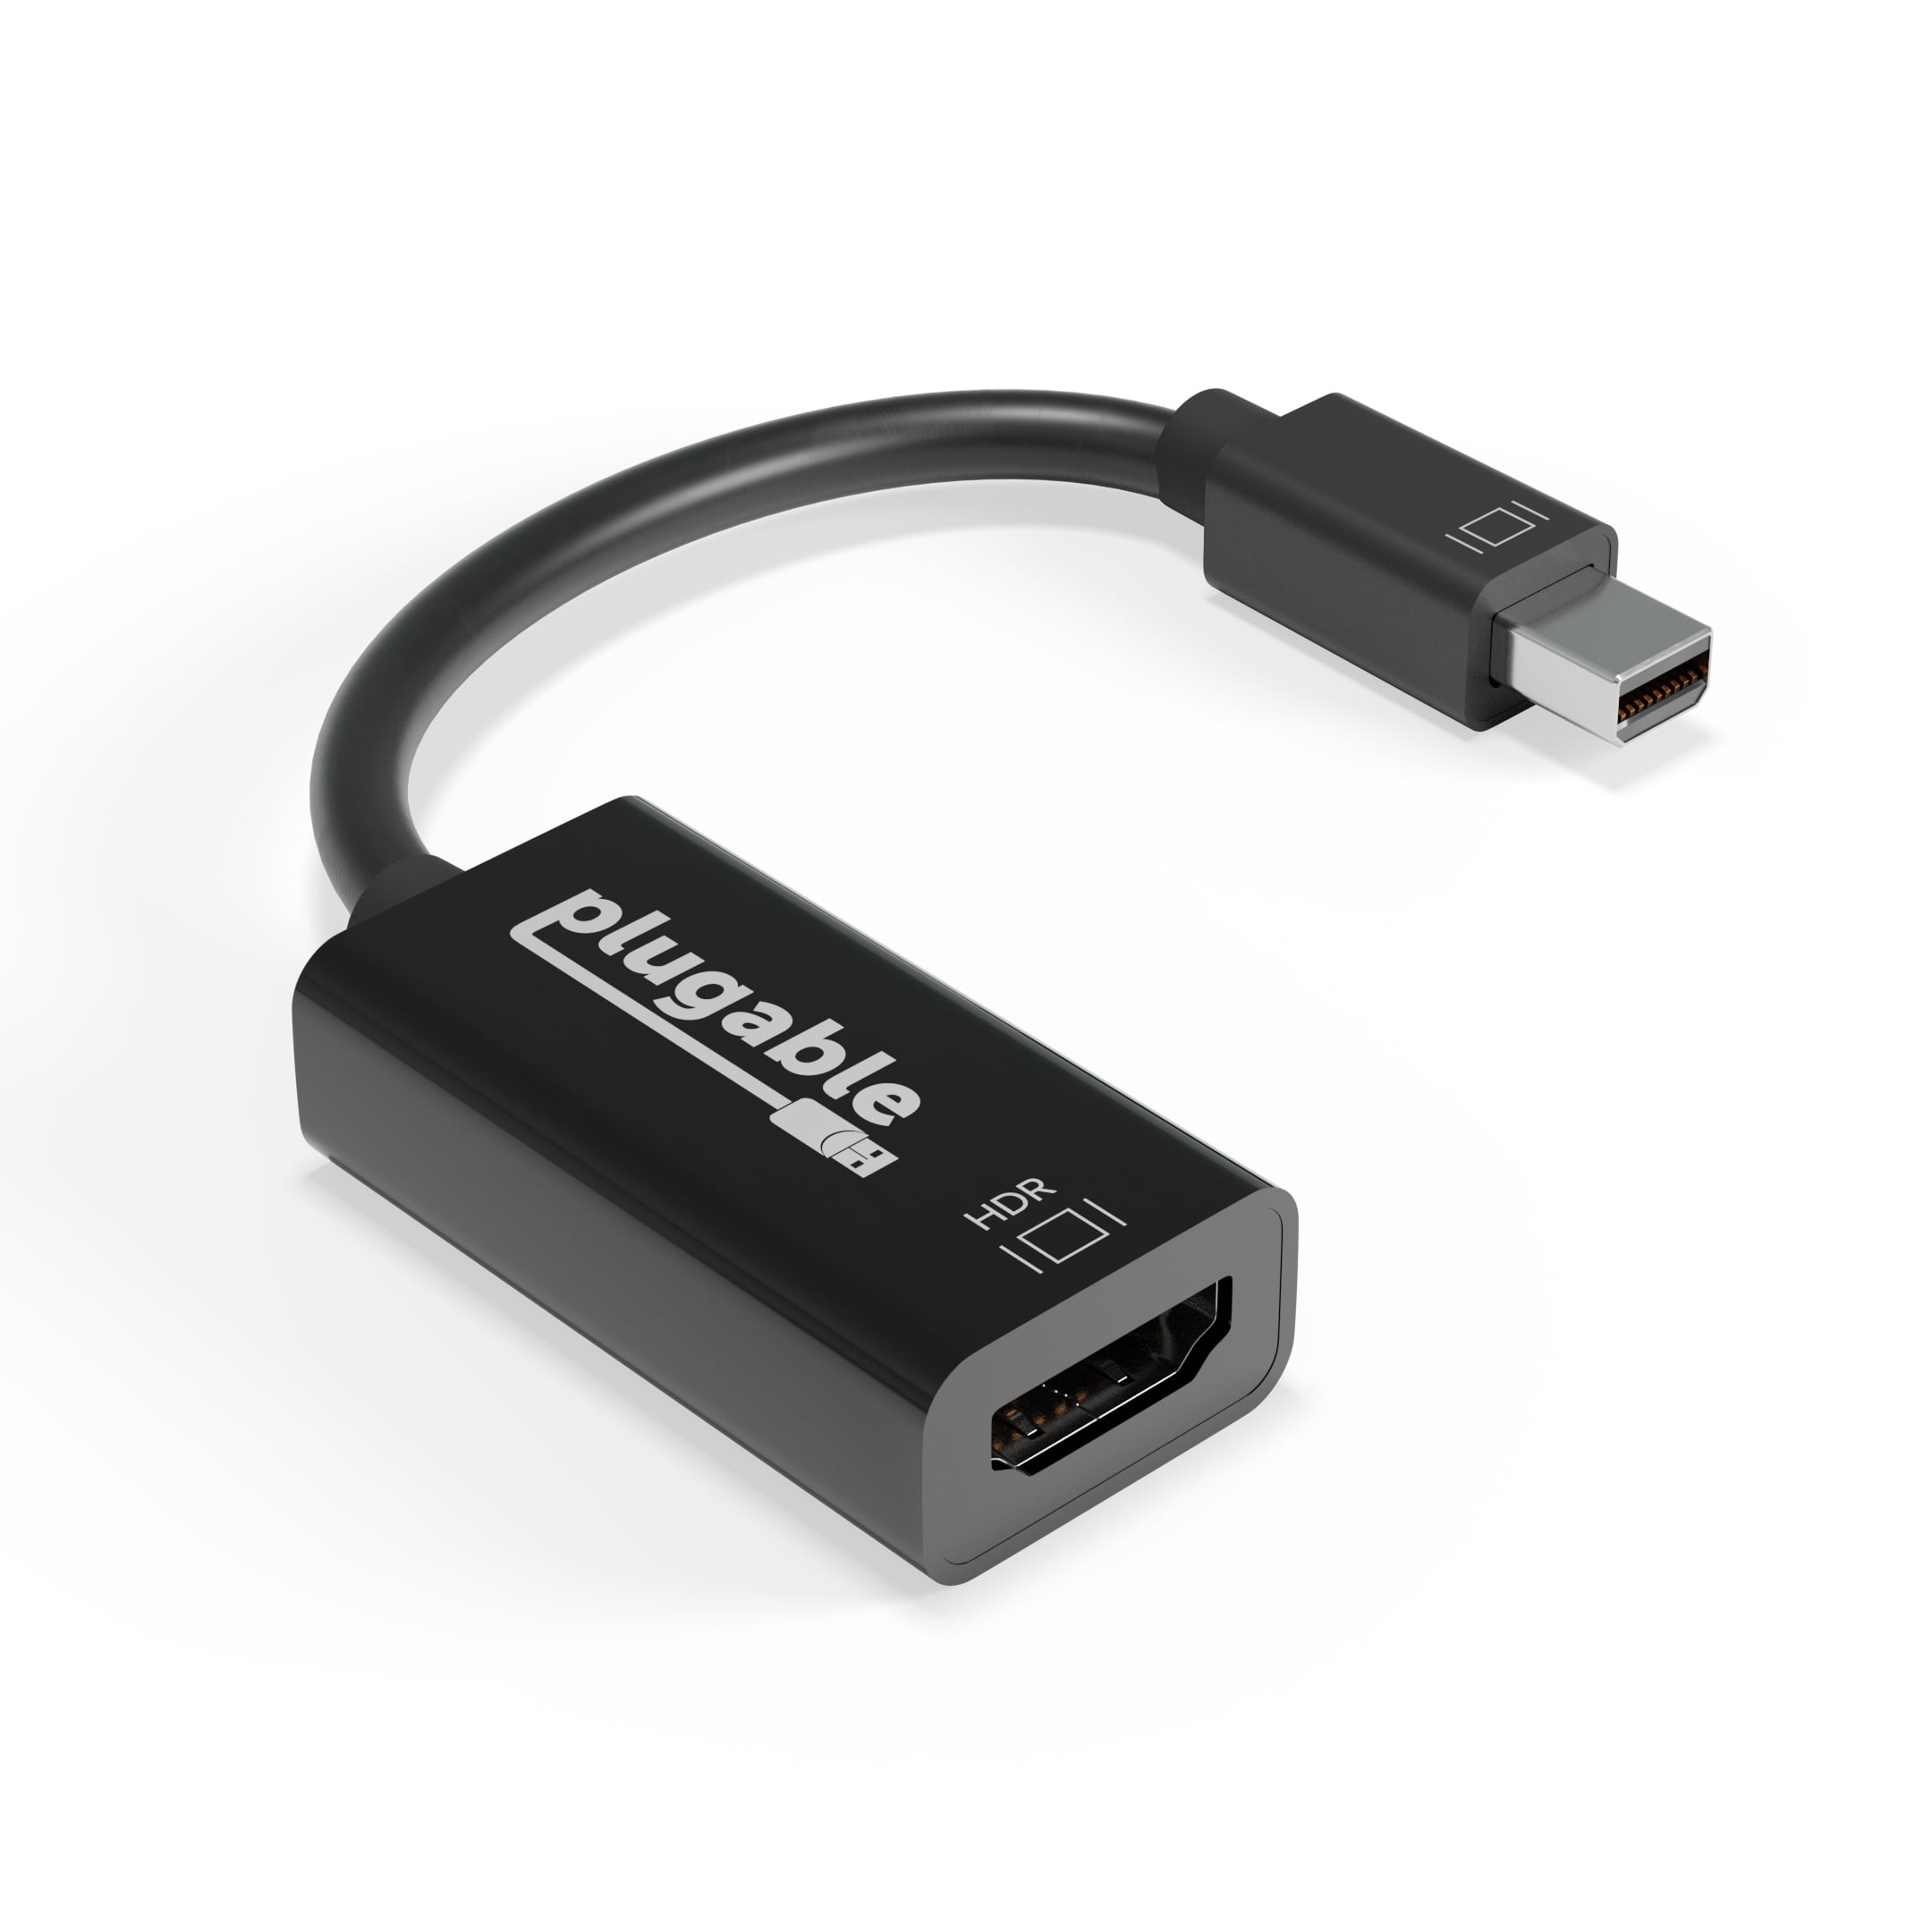 Plugable Mini DisplayPort / to HDMI 2.0 Adapter for Older Macs and Surface PCs with Ports - Walmart.com